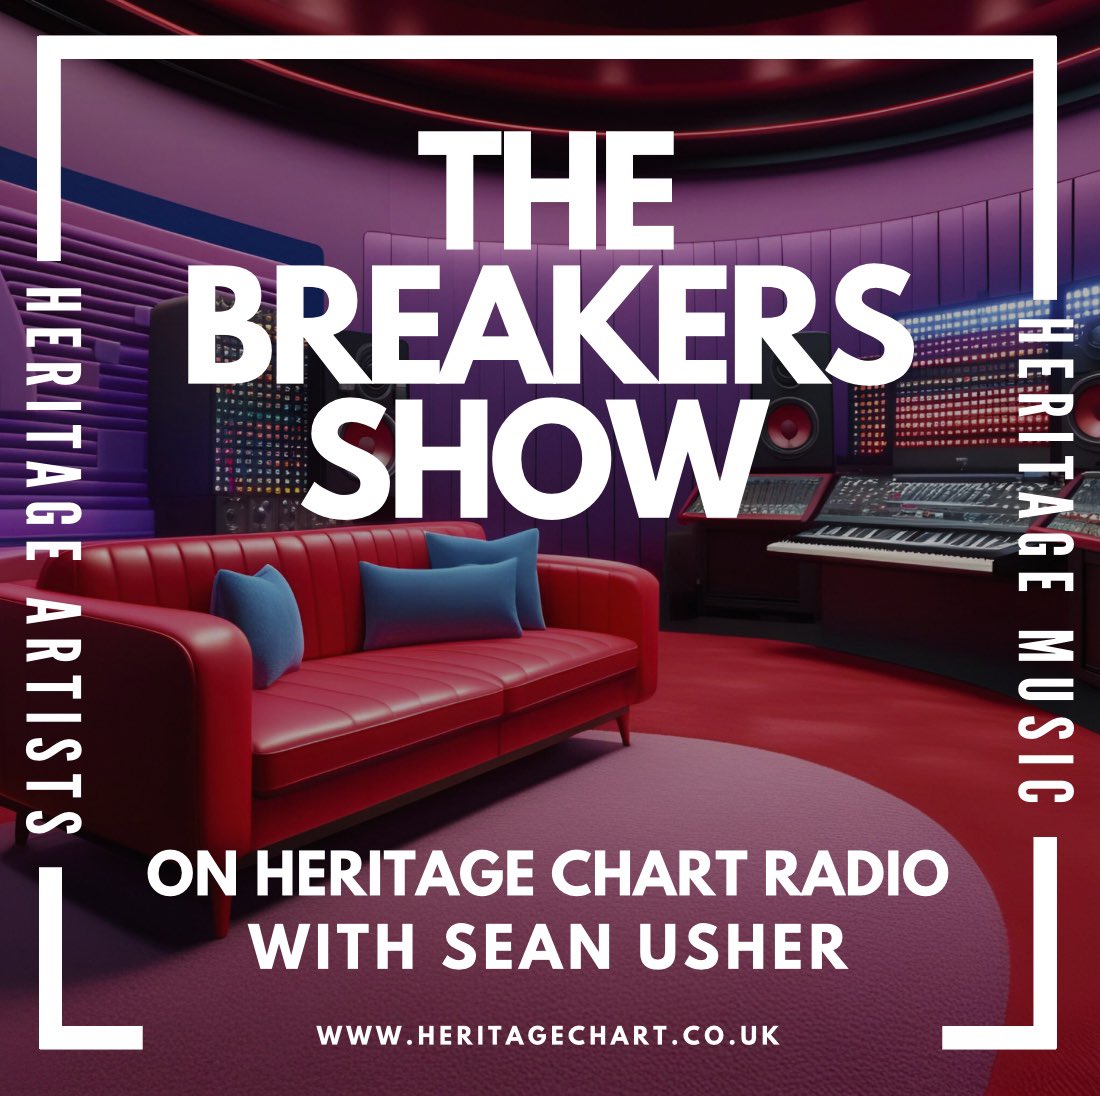 It’s that time of the week when all of those breakers , new entries and climbers can be heard in one show between 7pm and 9pm 😊 Join me live in the breakers studio at heritagechart.co.uk from 7pm Follow The Heritage Breakers Show on Facebook for a live feed 😊